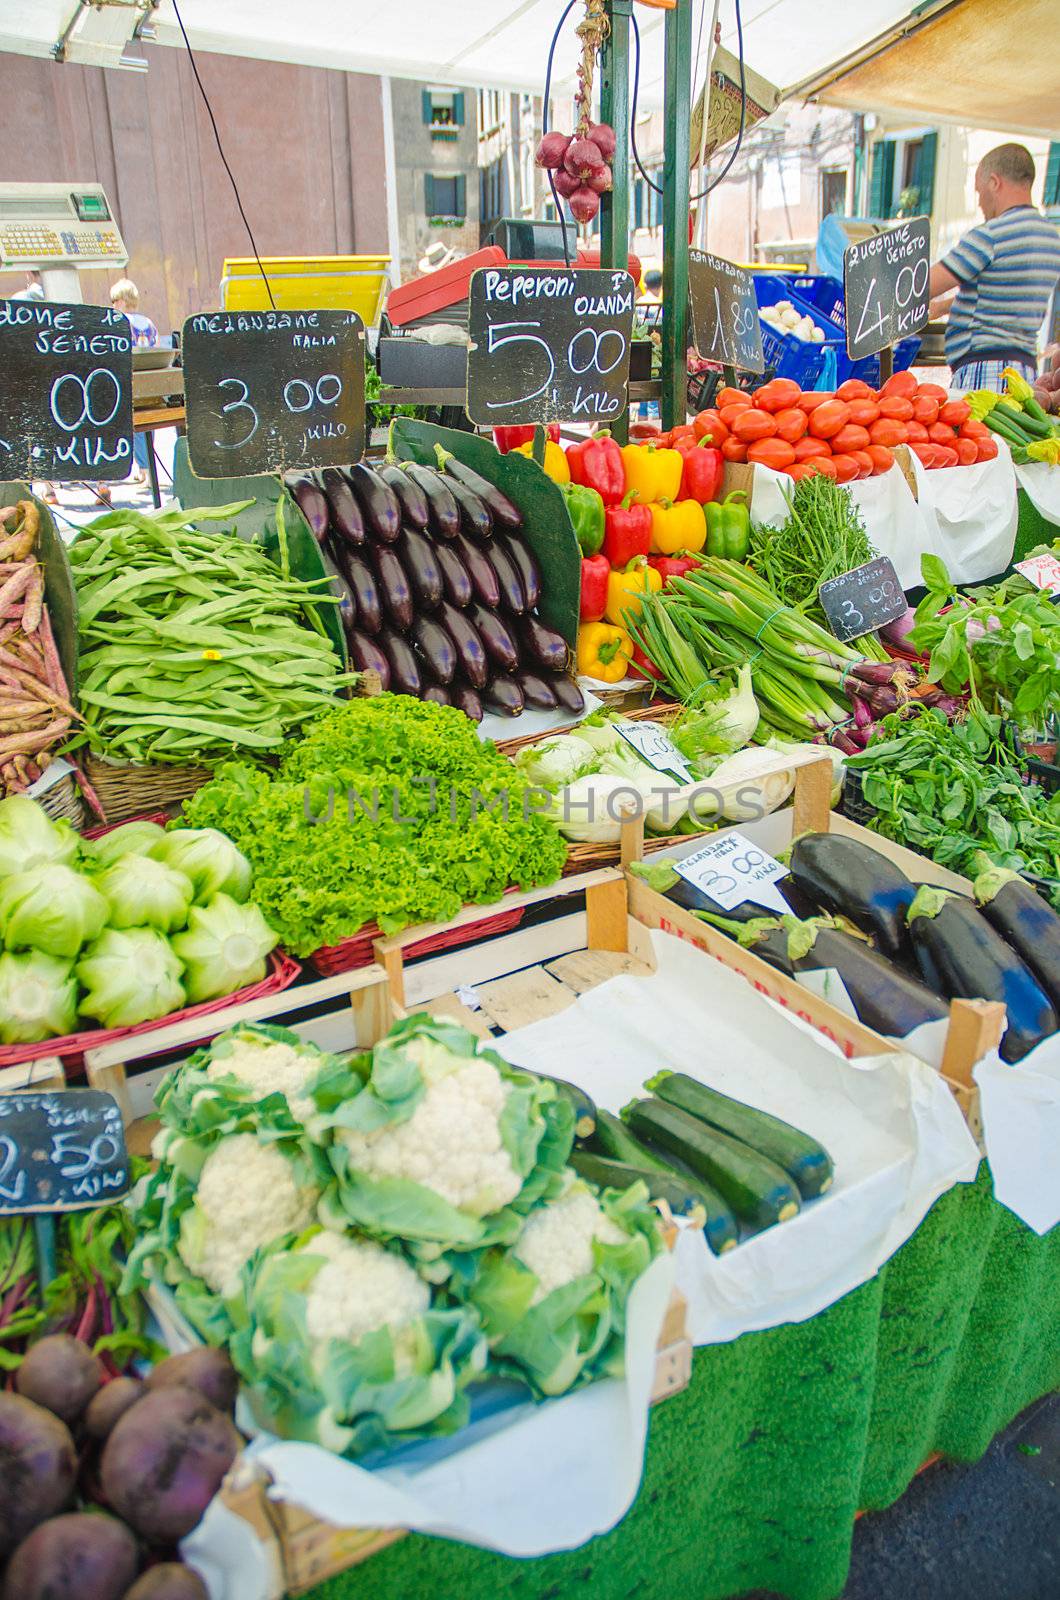 Fruits and vegetables at the market stall